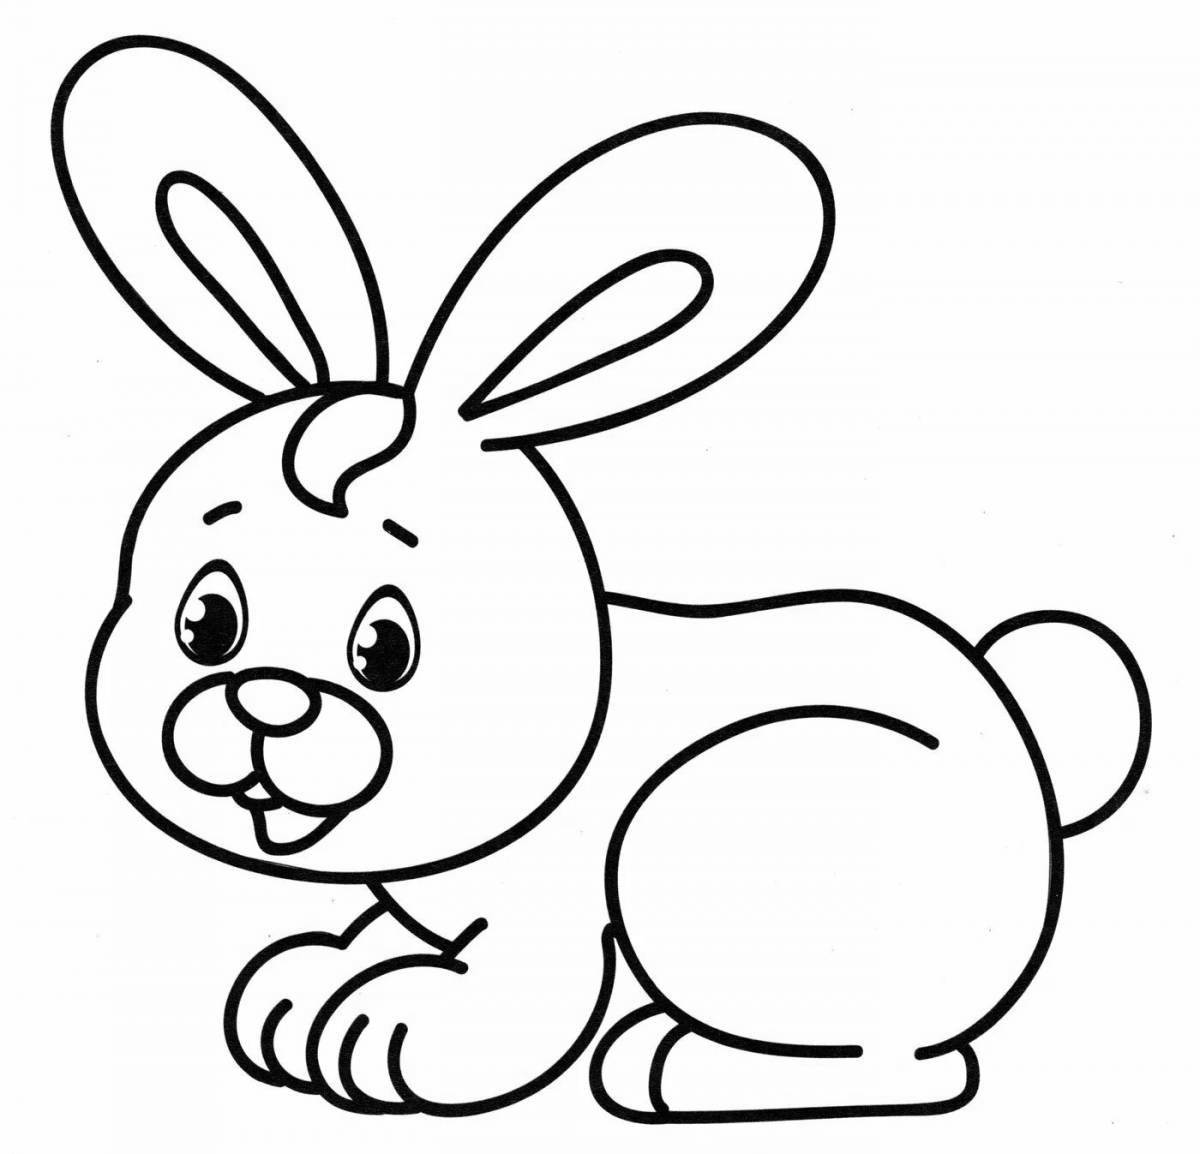 Radiant coloring page bunny drawing